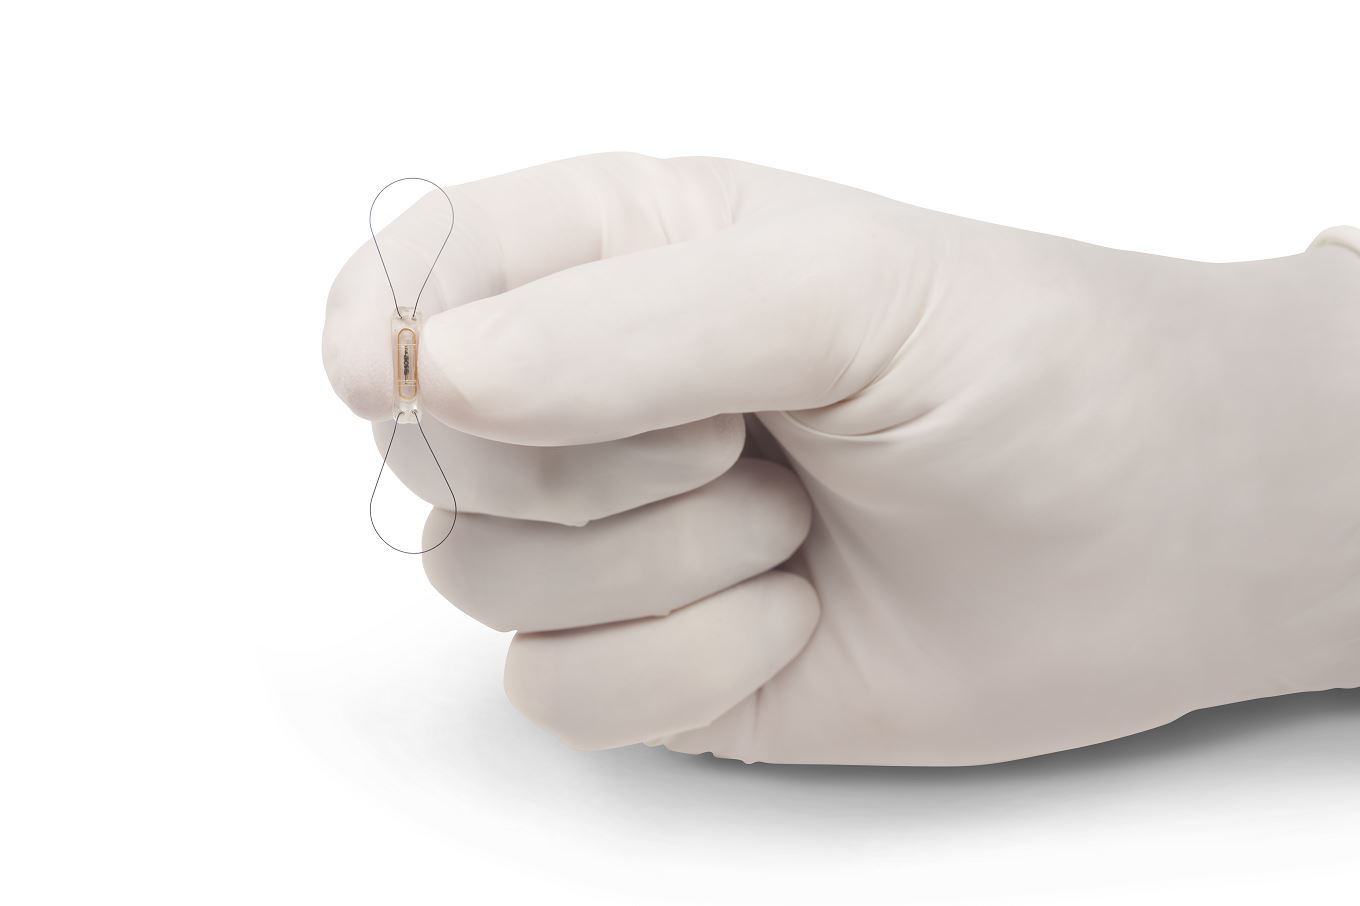 UConn Health's Calhoun Cardiology Center doctors are now offering heart failure patients tiny, implantable sensors so their chronic condition can be closely monitored while they are at home (Photo by Abbott).